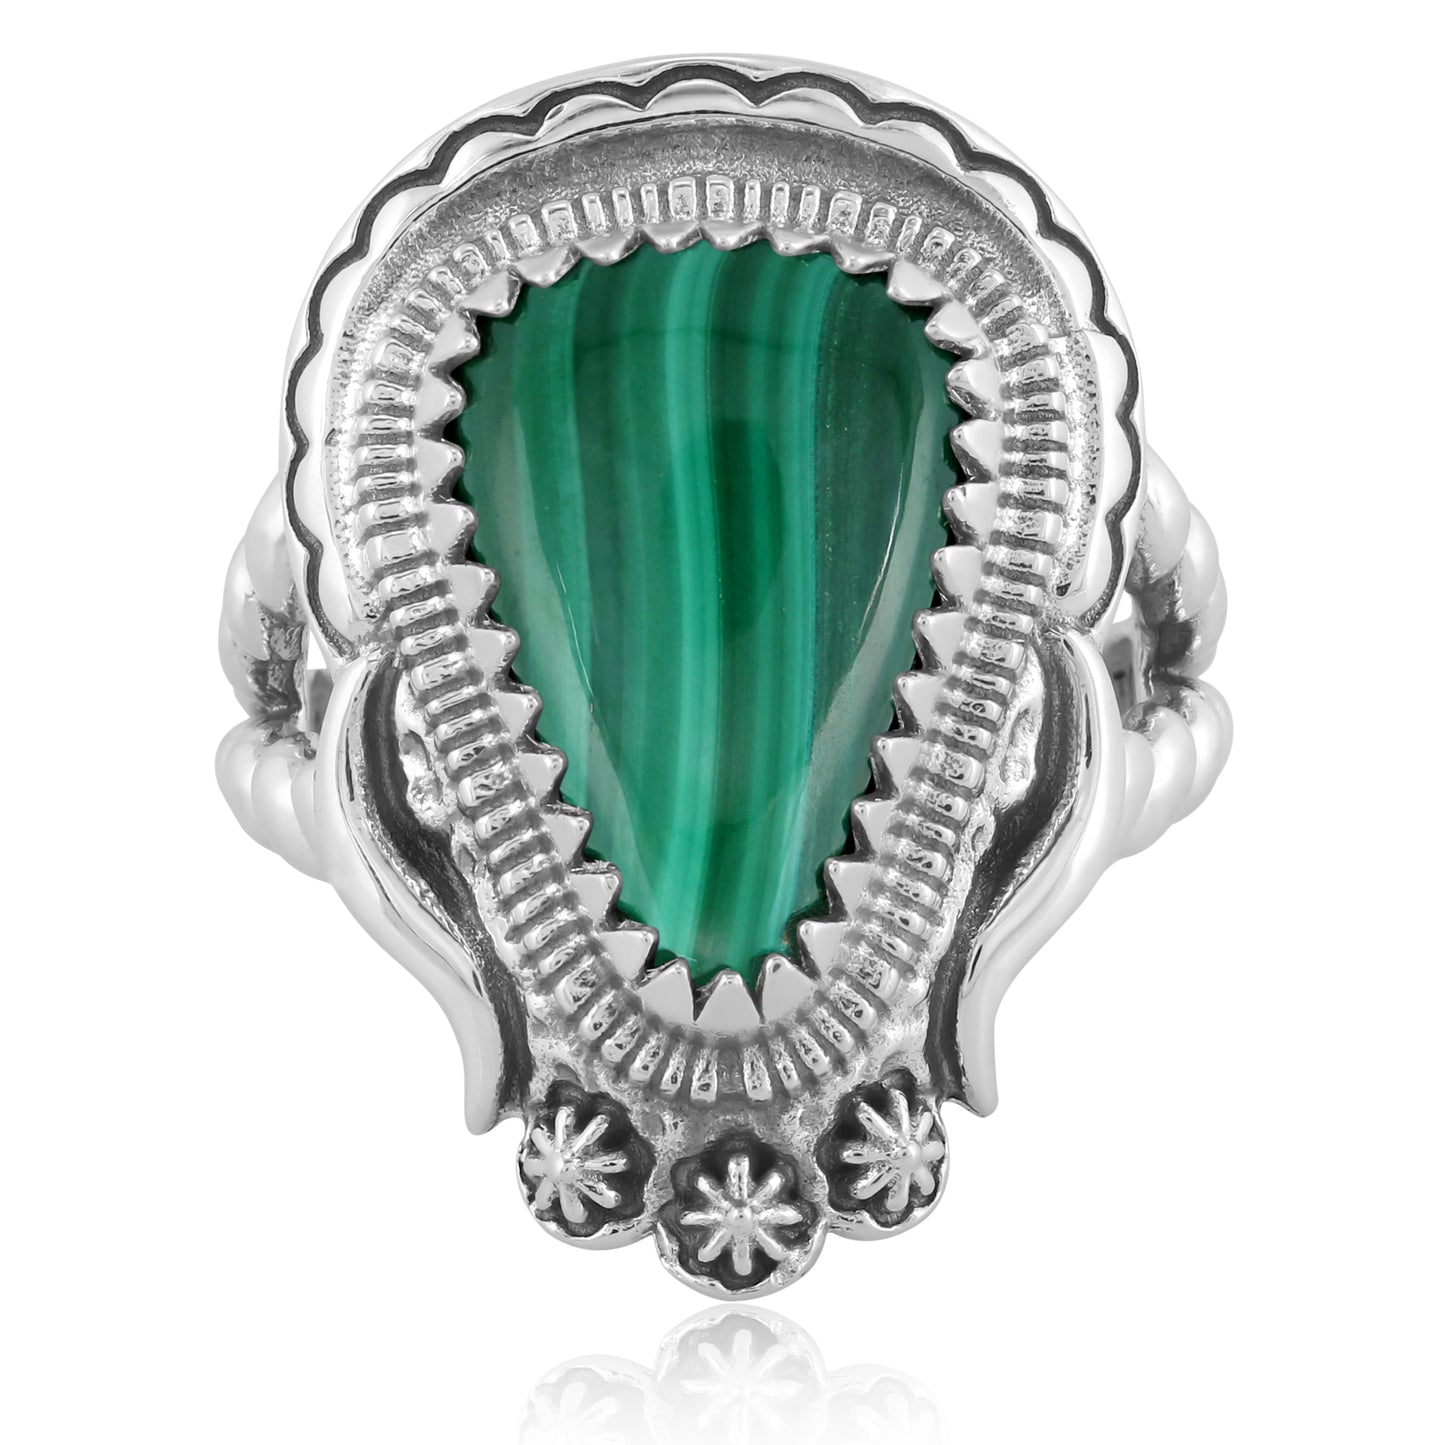 Southwestern Buffalo Green Rope Ring with Sterling Silver Band and Malachite Gemstone, Size 6 - 11